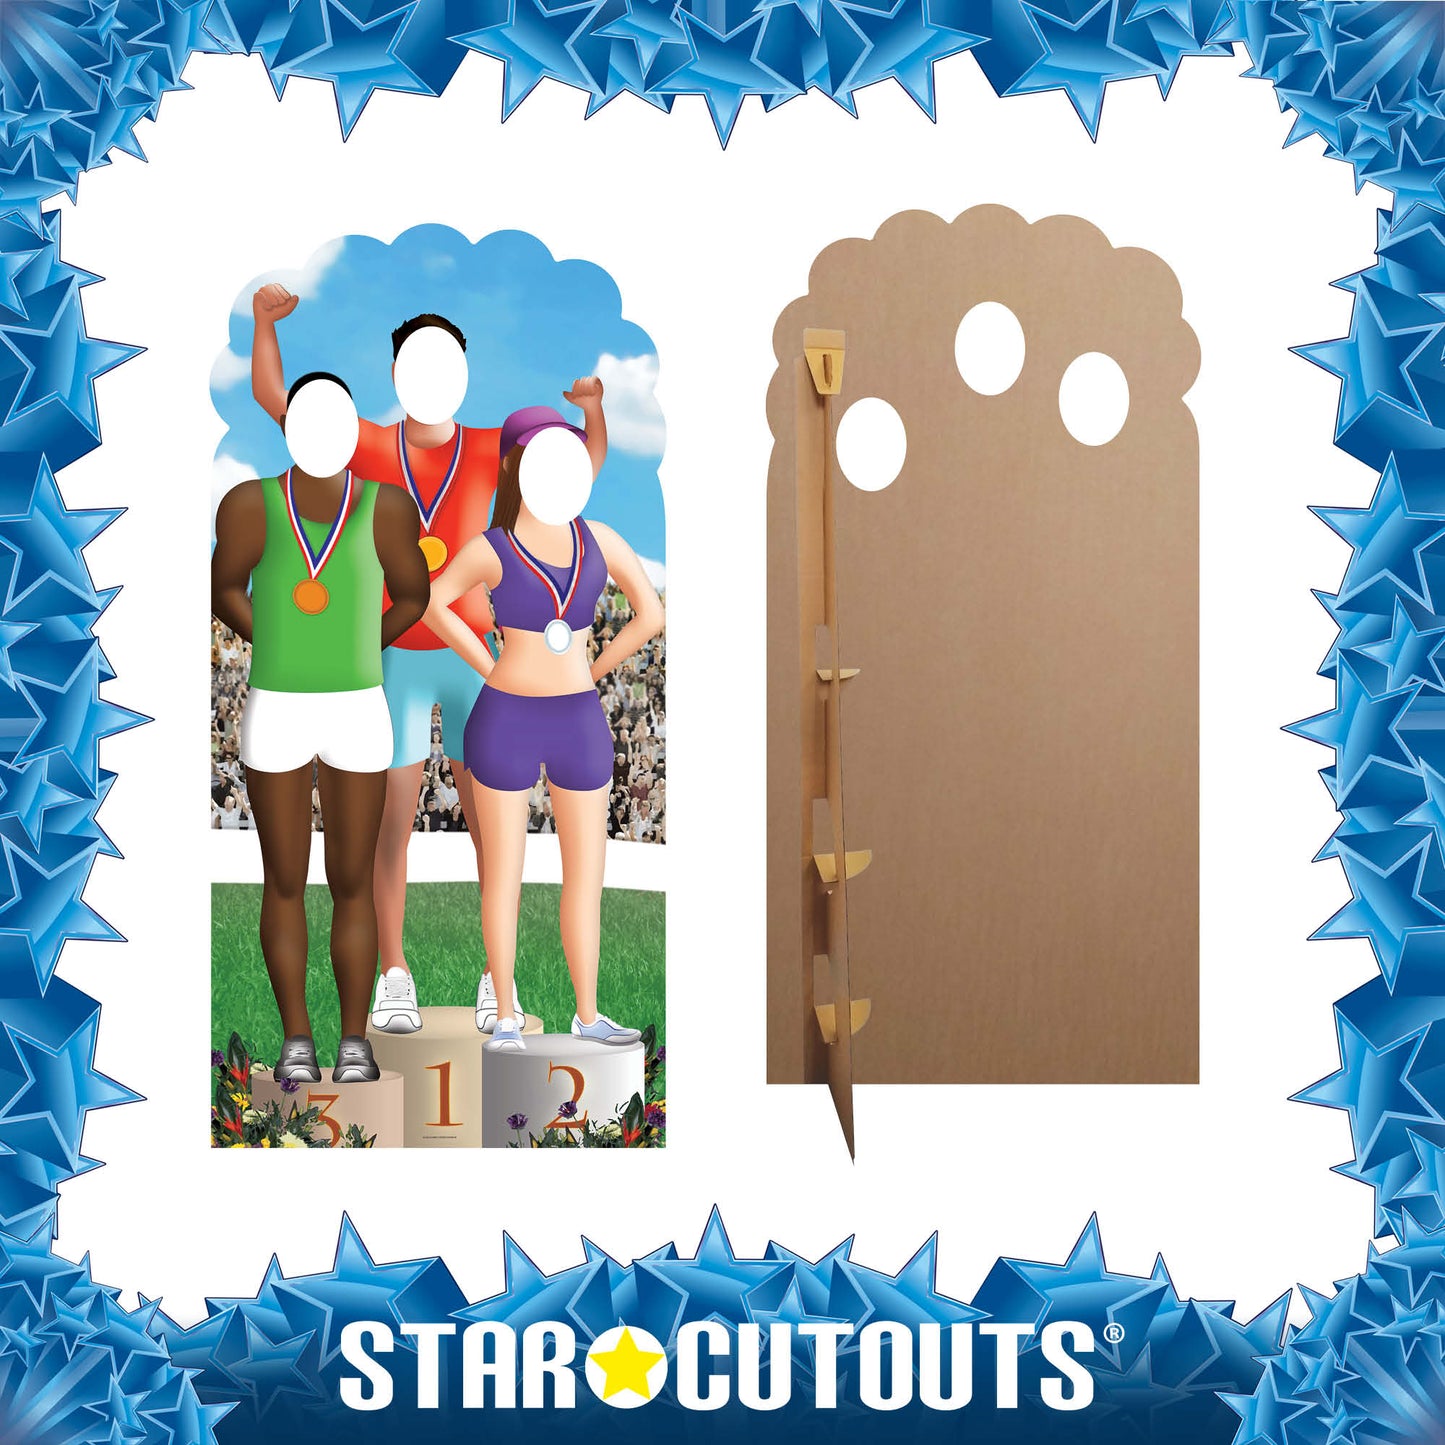 Tournament Medals Gold Silver Bronze Sports and Athletics Games Stand-In Cardboard Cutout